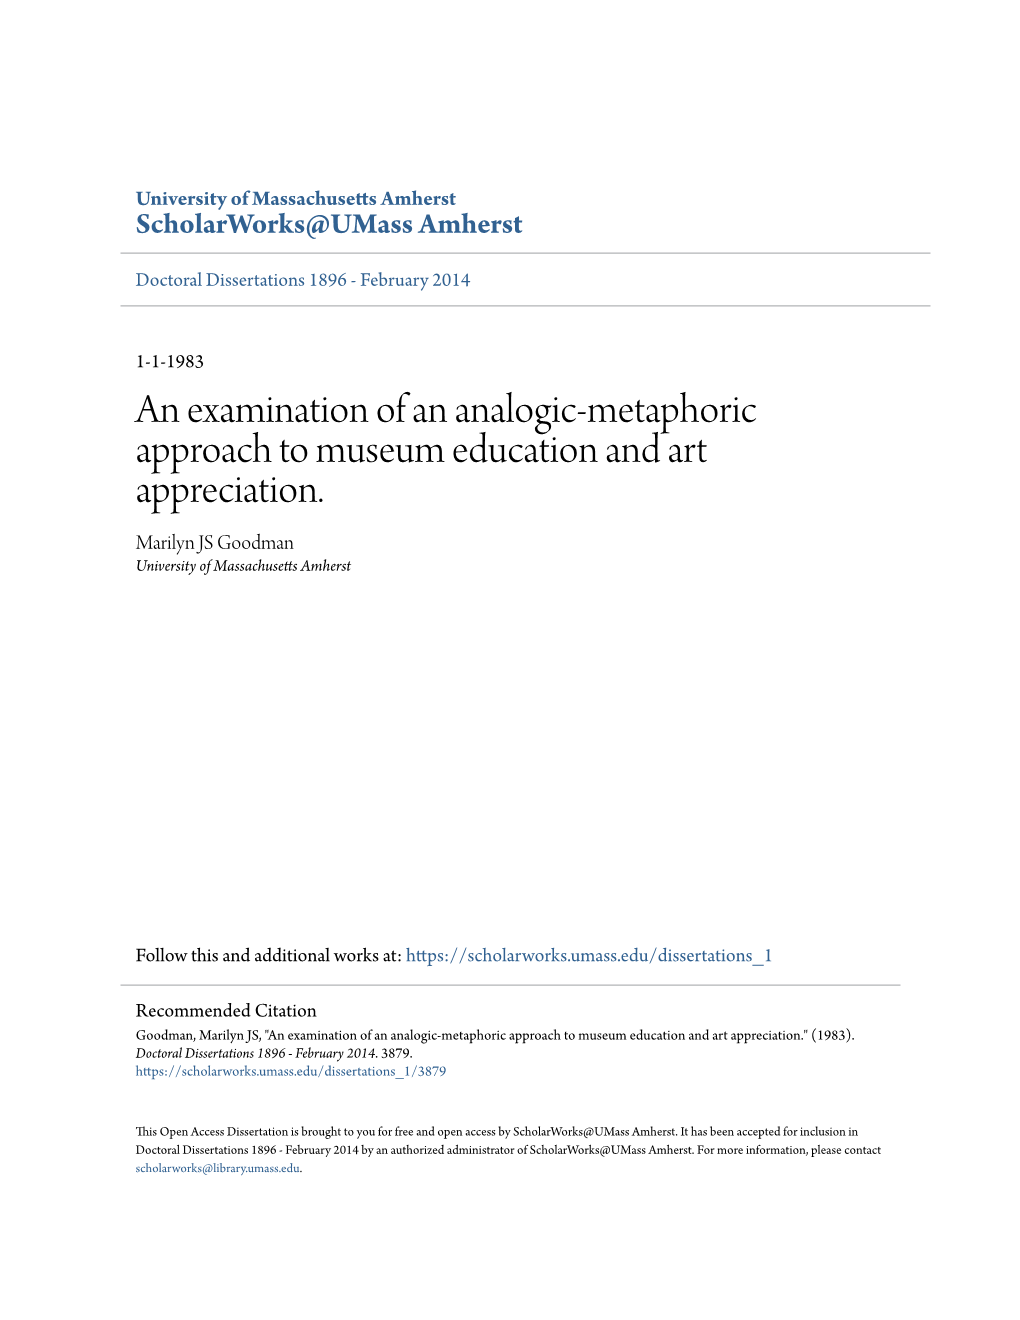 An Examination of an Analogic-Metaphoric Approach to Museum Education and Art Appreciation